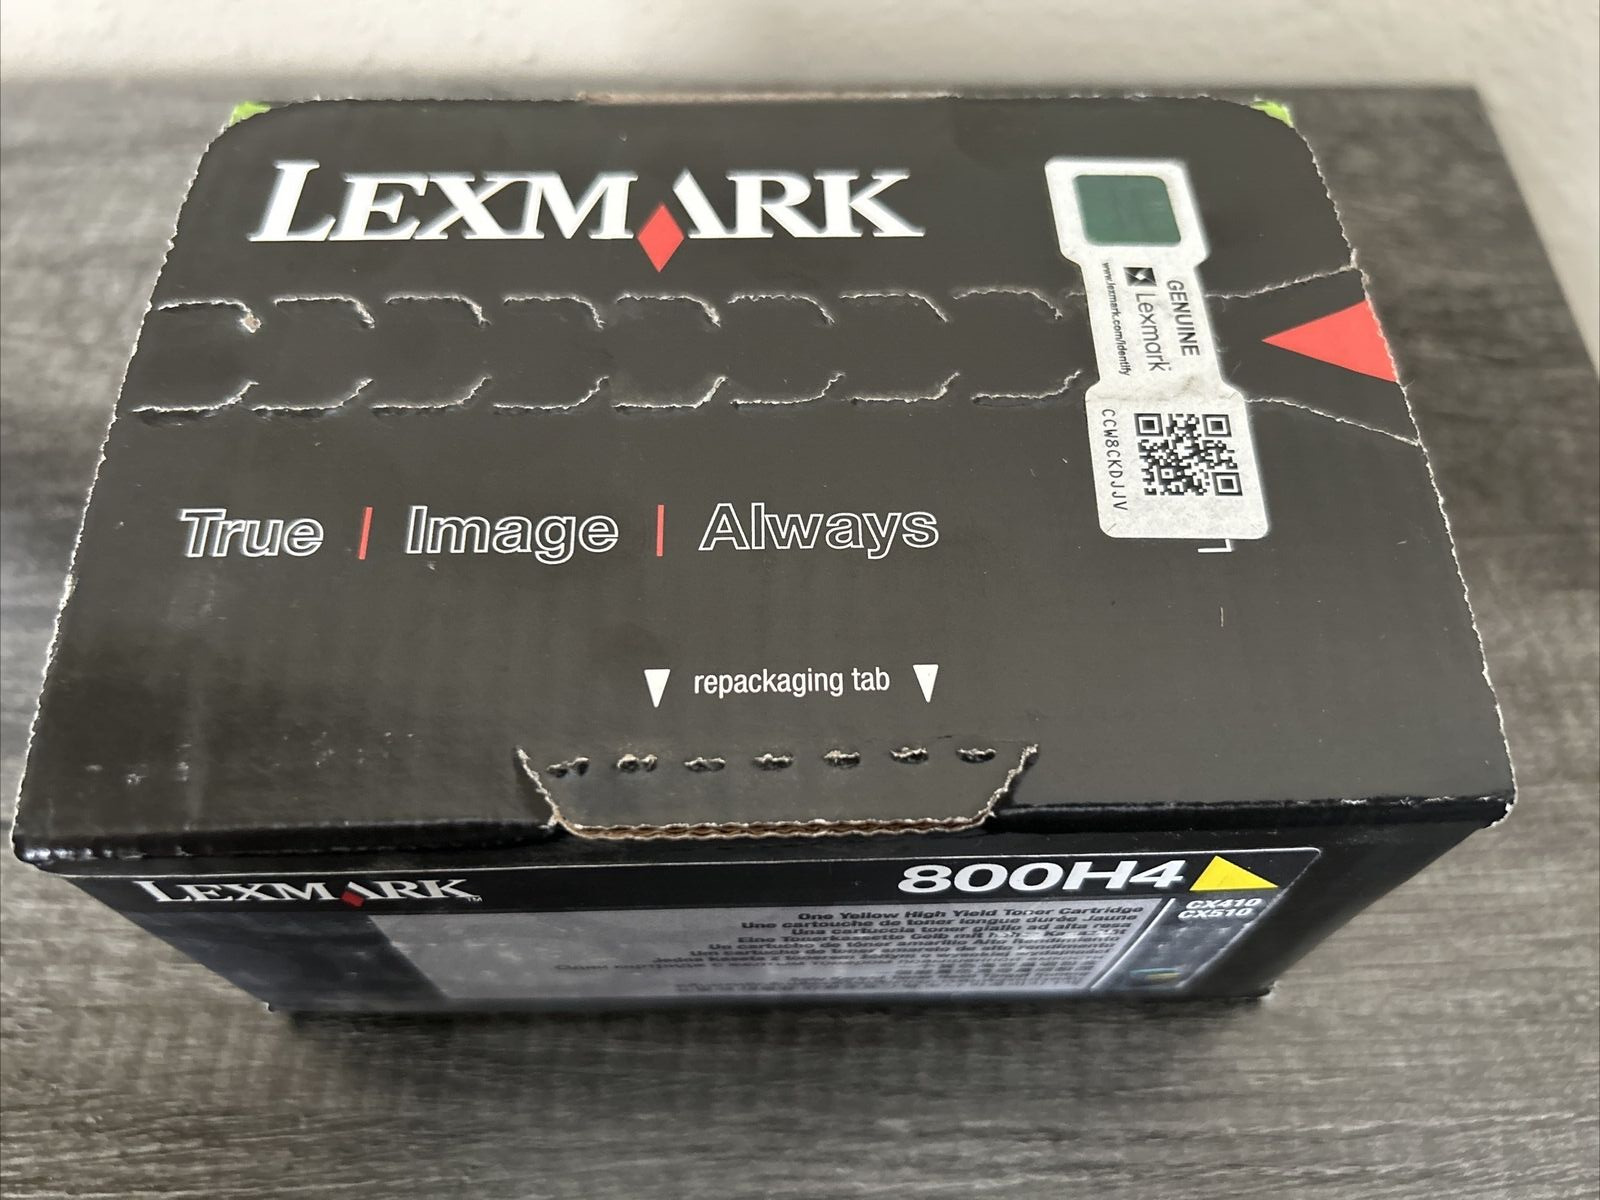 LEXMARK 800H4 Yellow High Yield Toner - Compatible with Lexmark CX410 and CX510